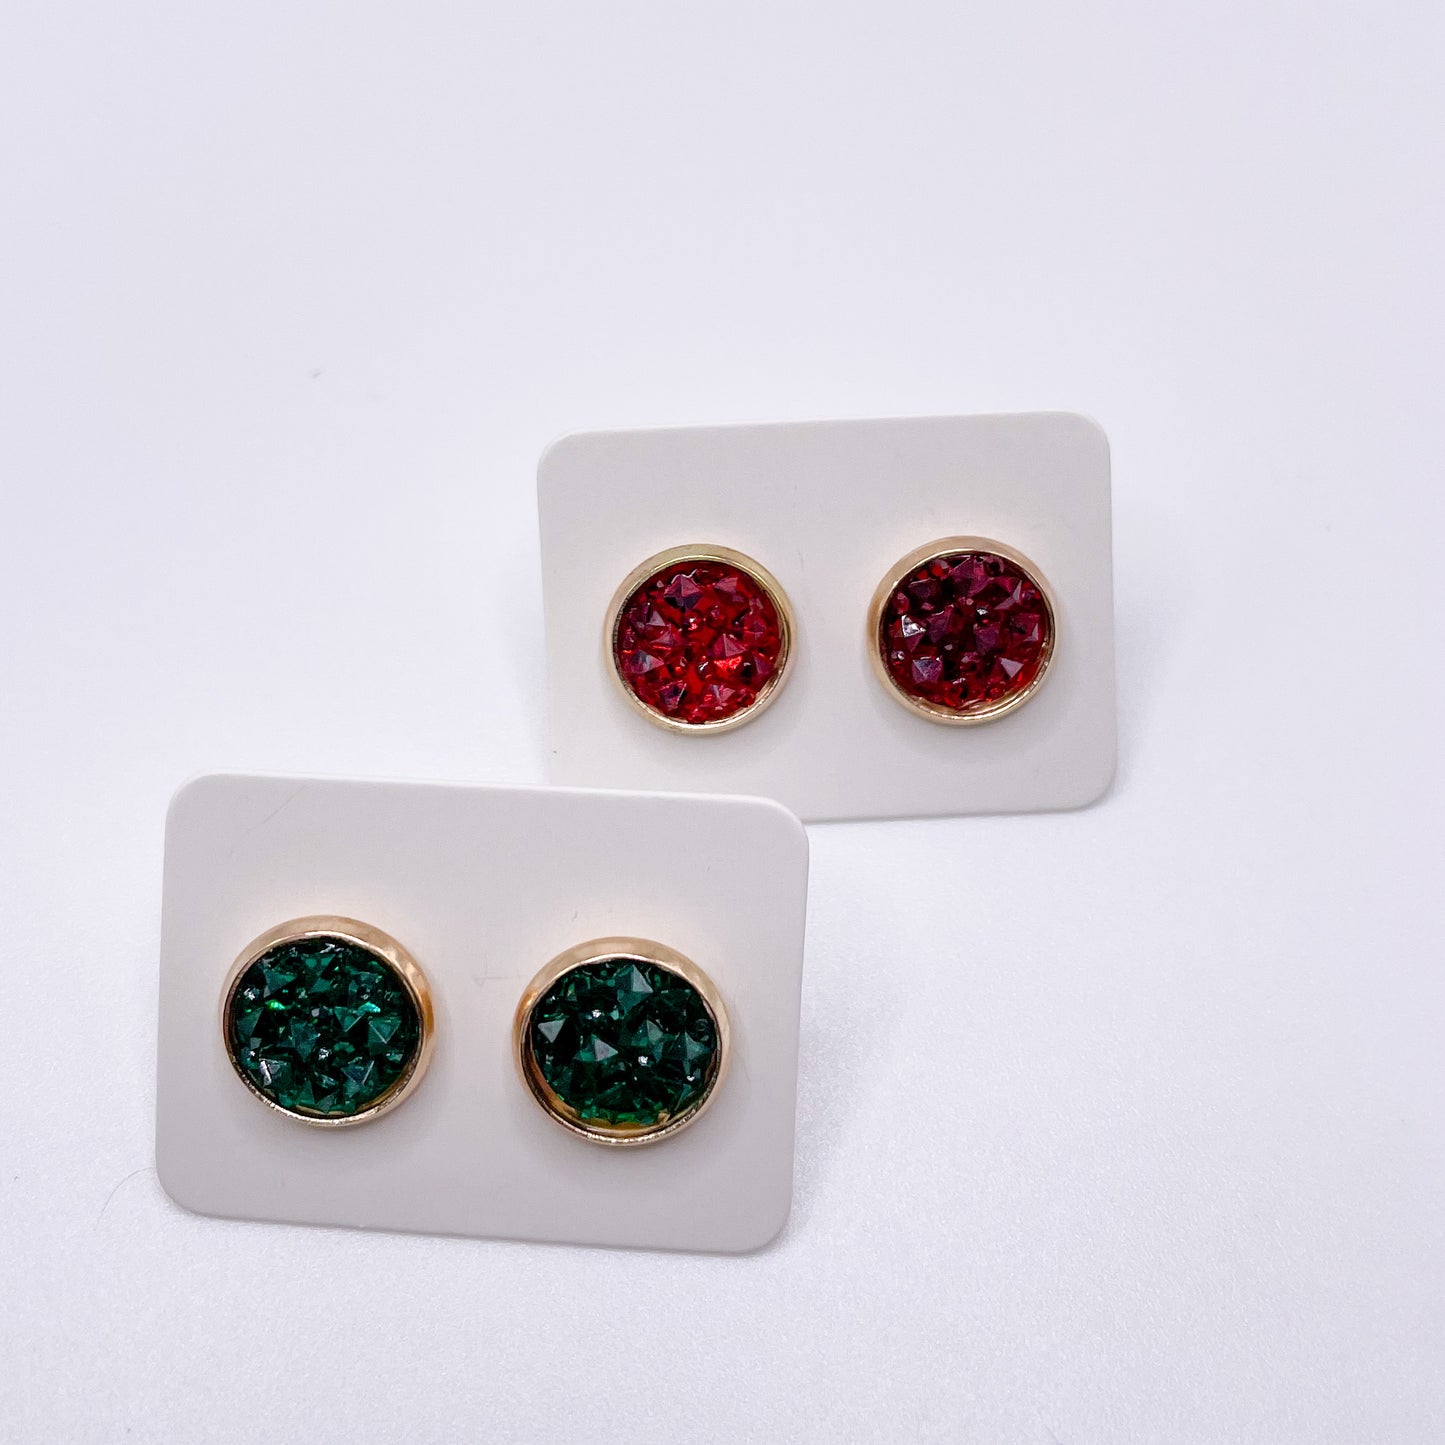 Charis Style - 10 MM Studs - Christmas Colors Red and Green in Gold